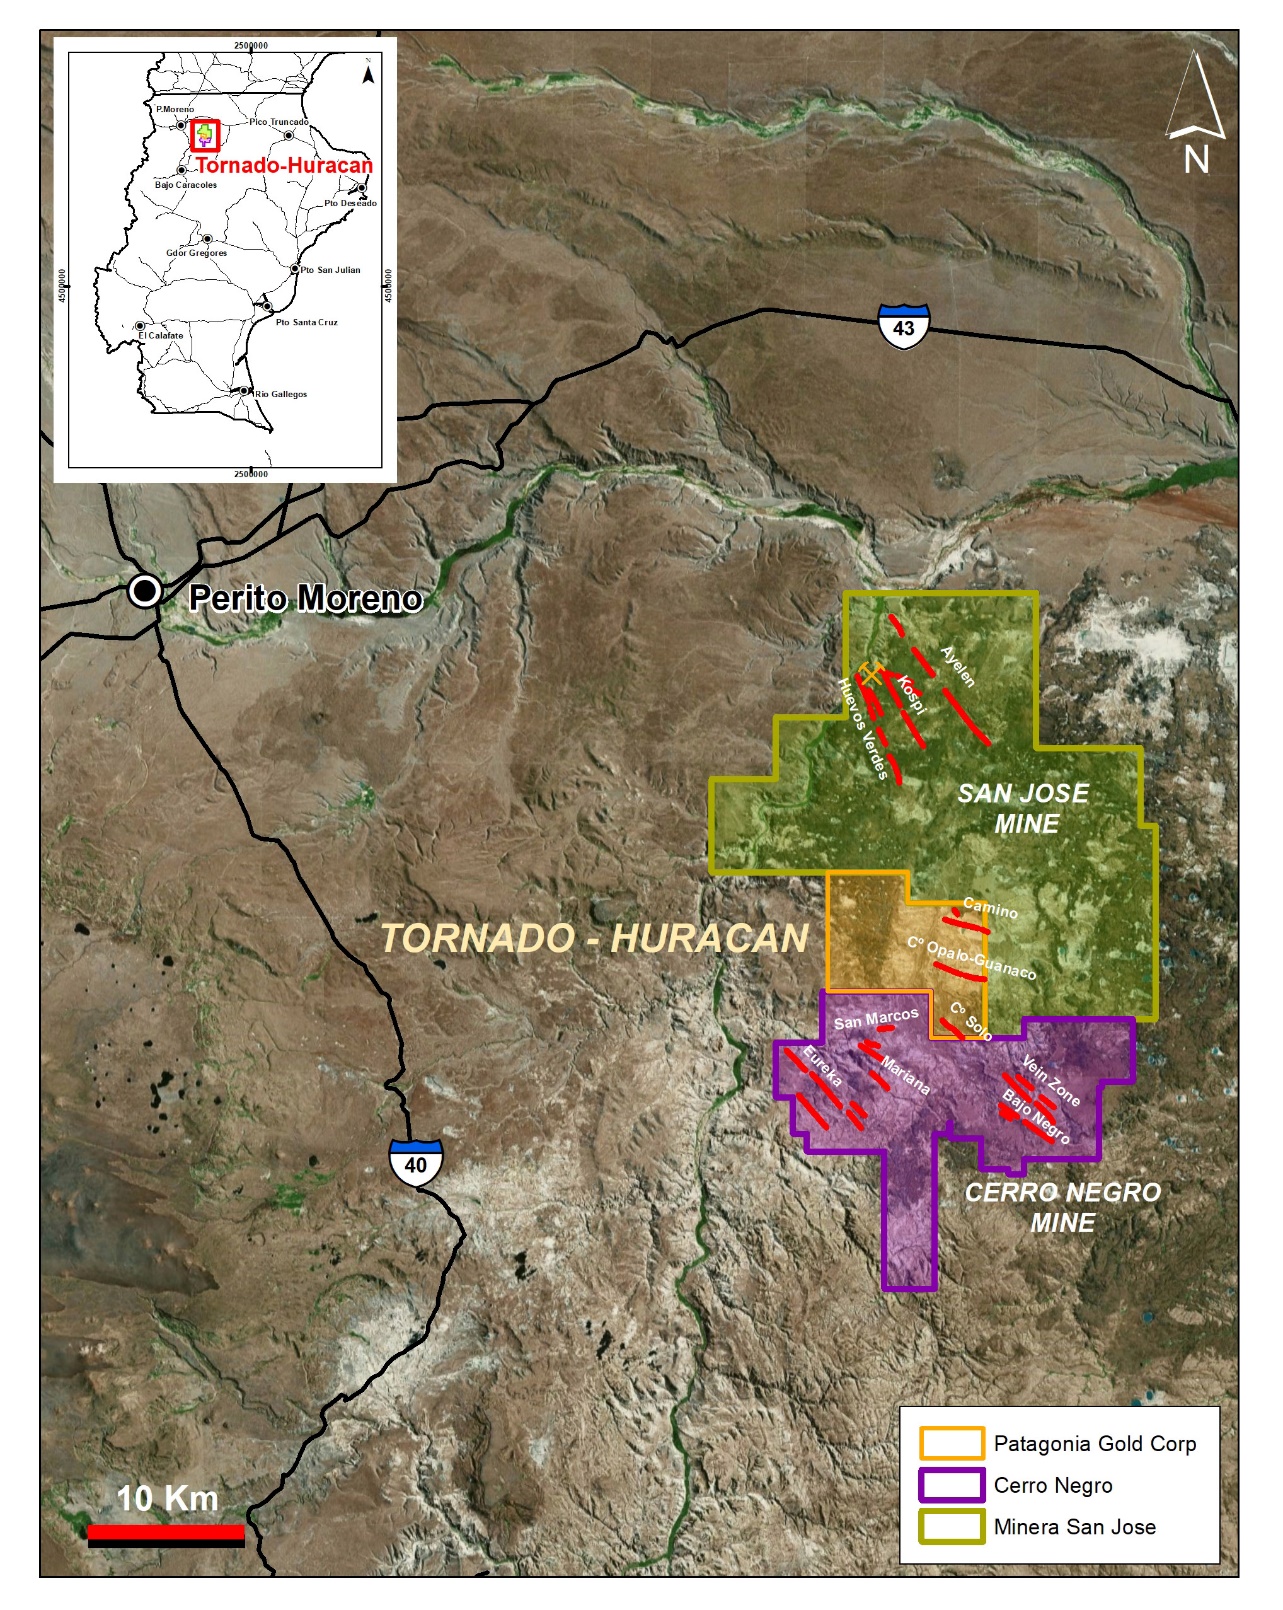 Figure 1: Location of Tornado and Huracán Property in Argentina